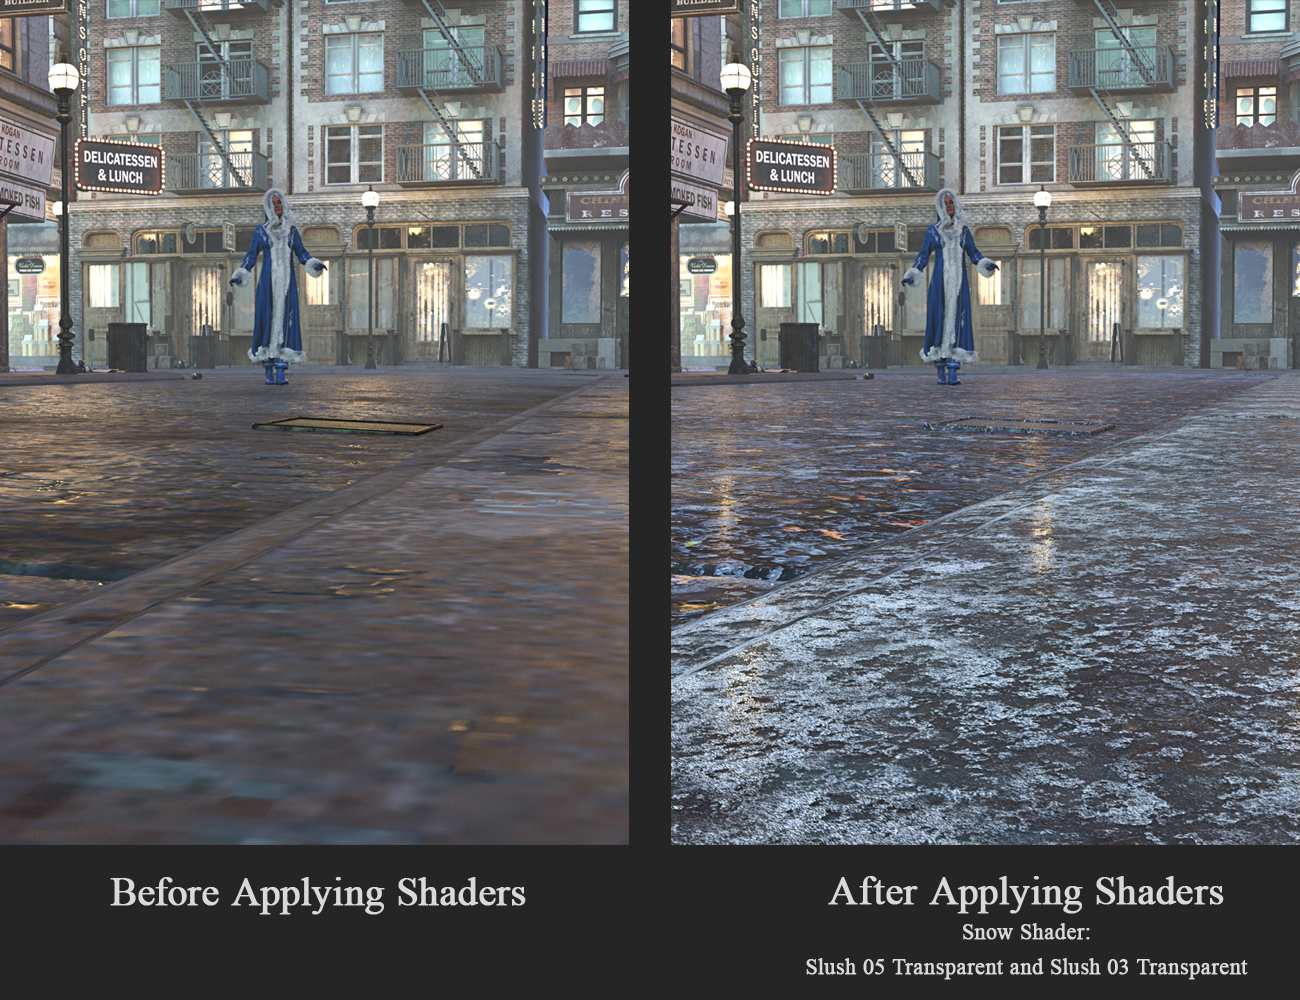 Before and After snow shaders applied to city street